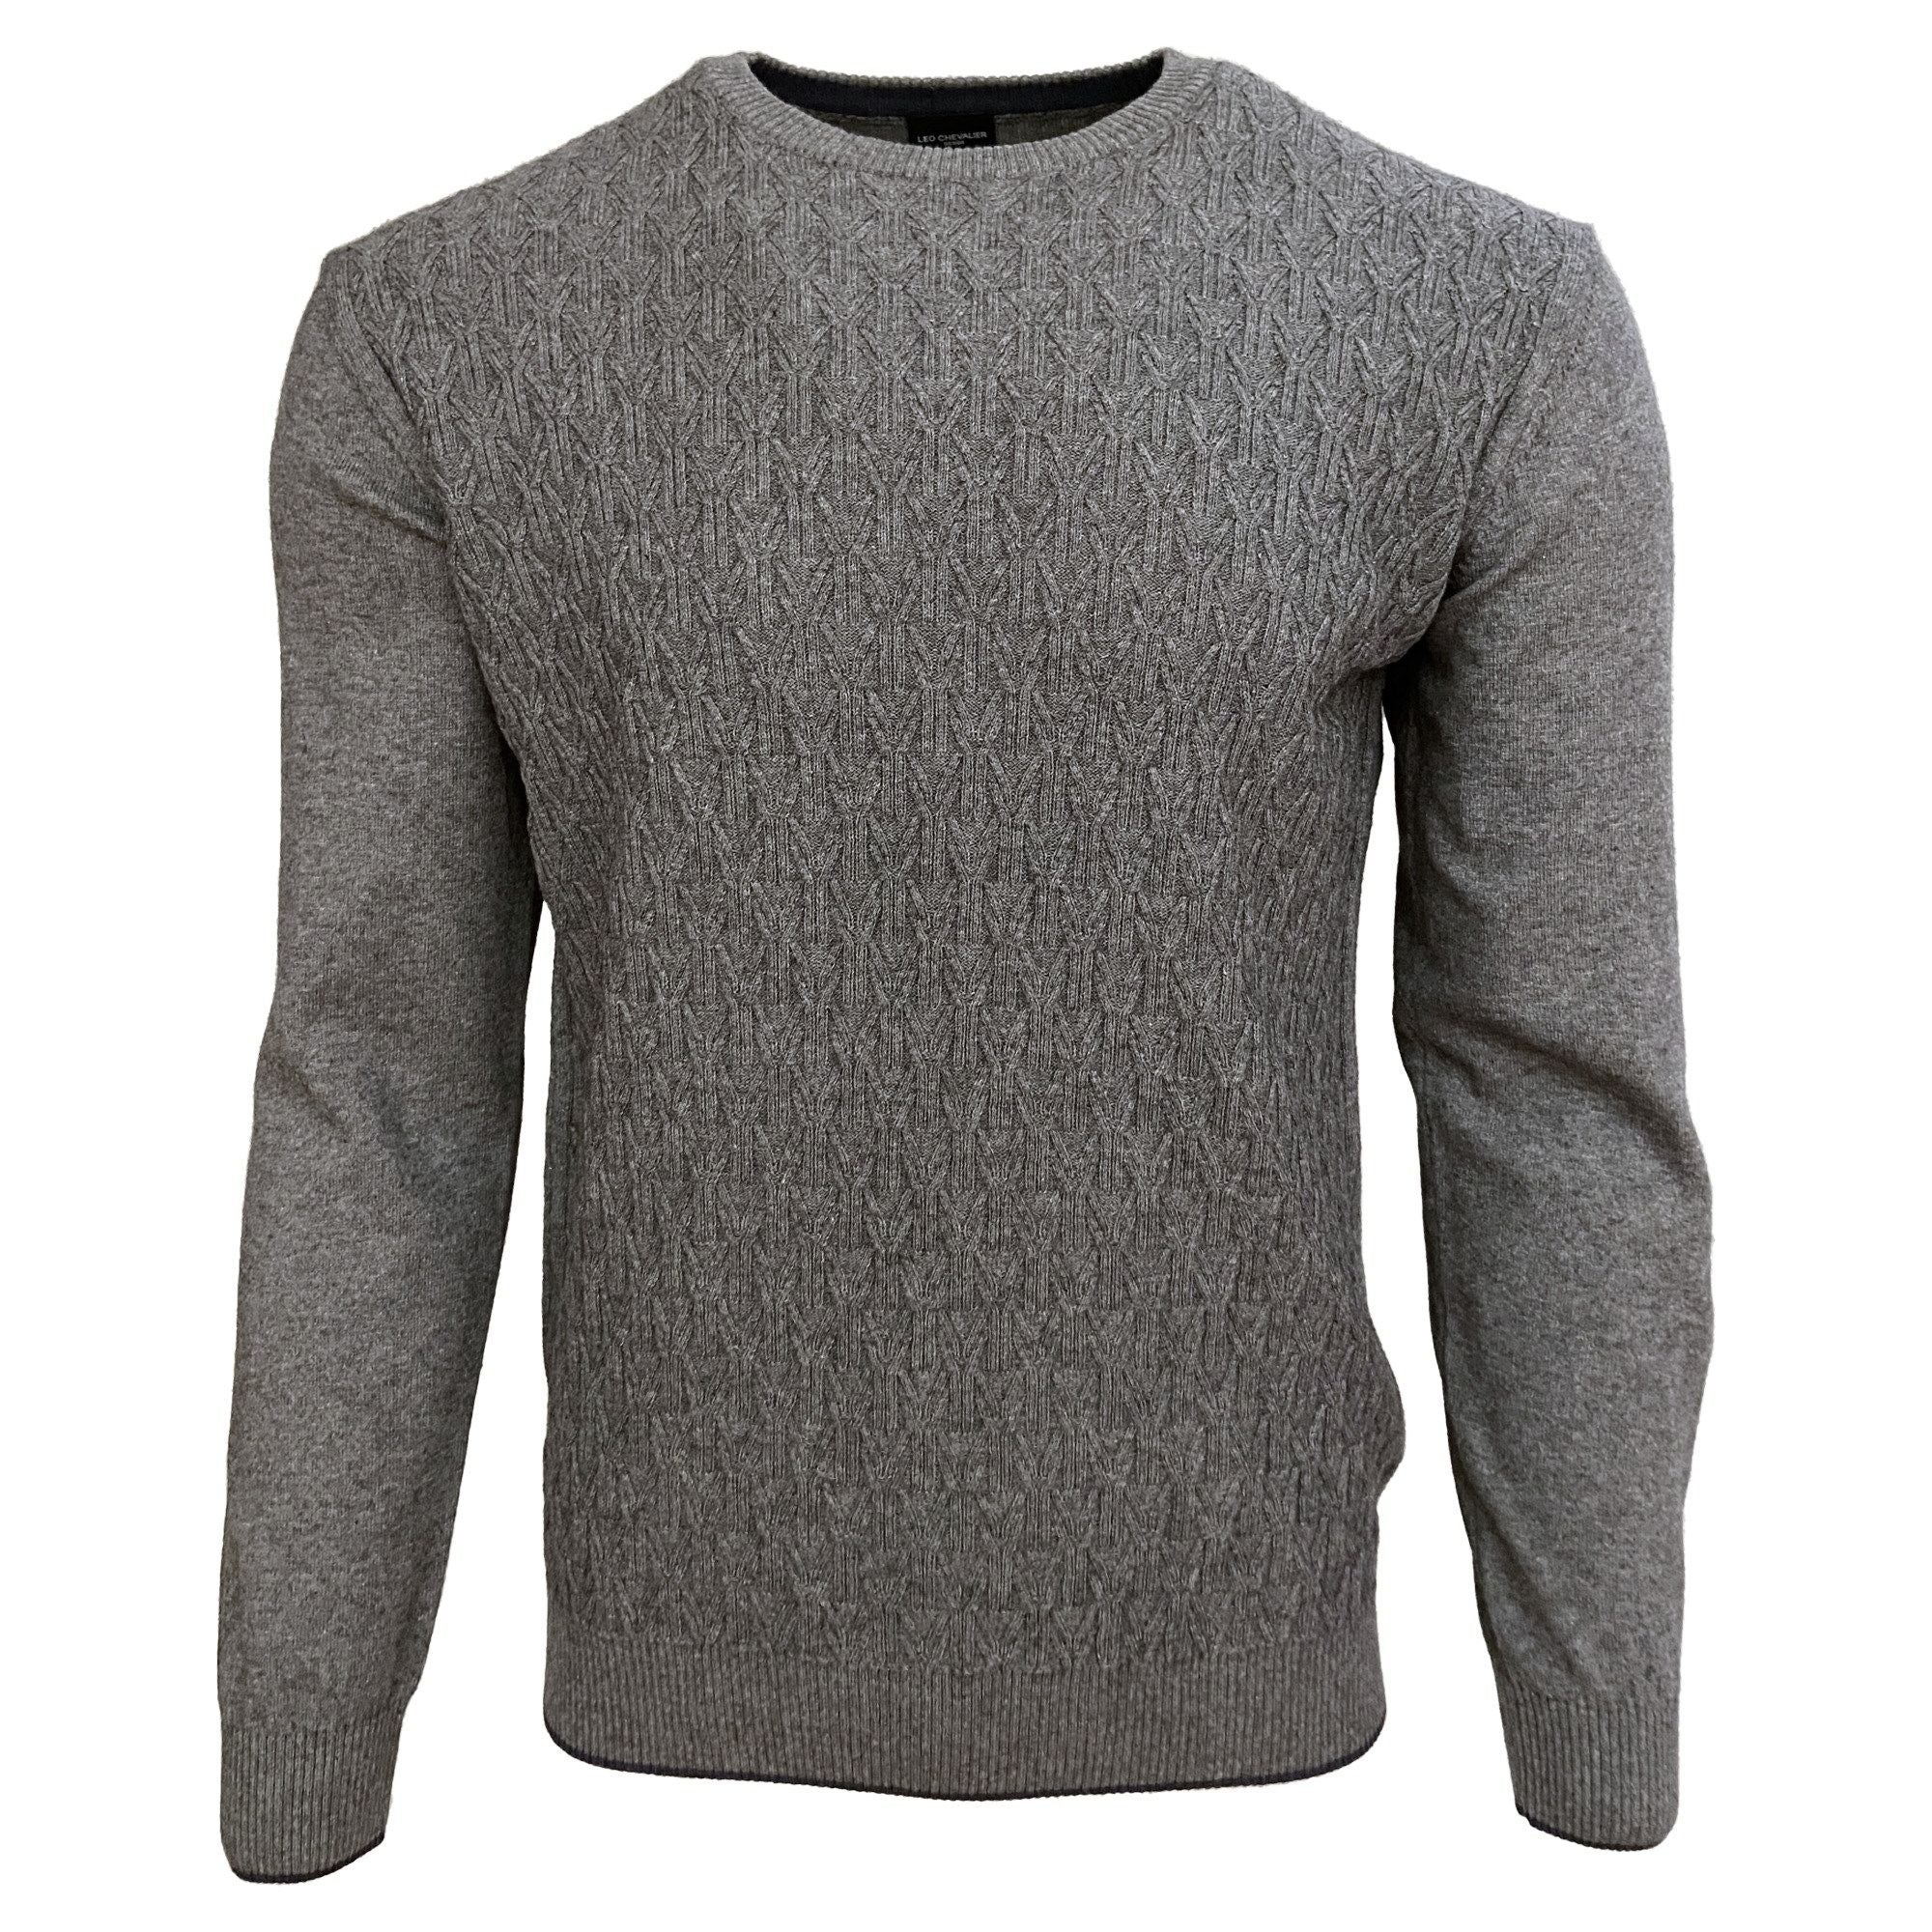 Cable Knit Organic Cotton & Wool Blend Crew Neck Sweater in Charcoal by Leo Chevalier